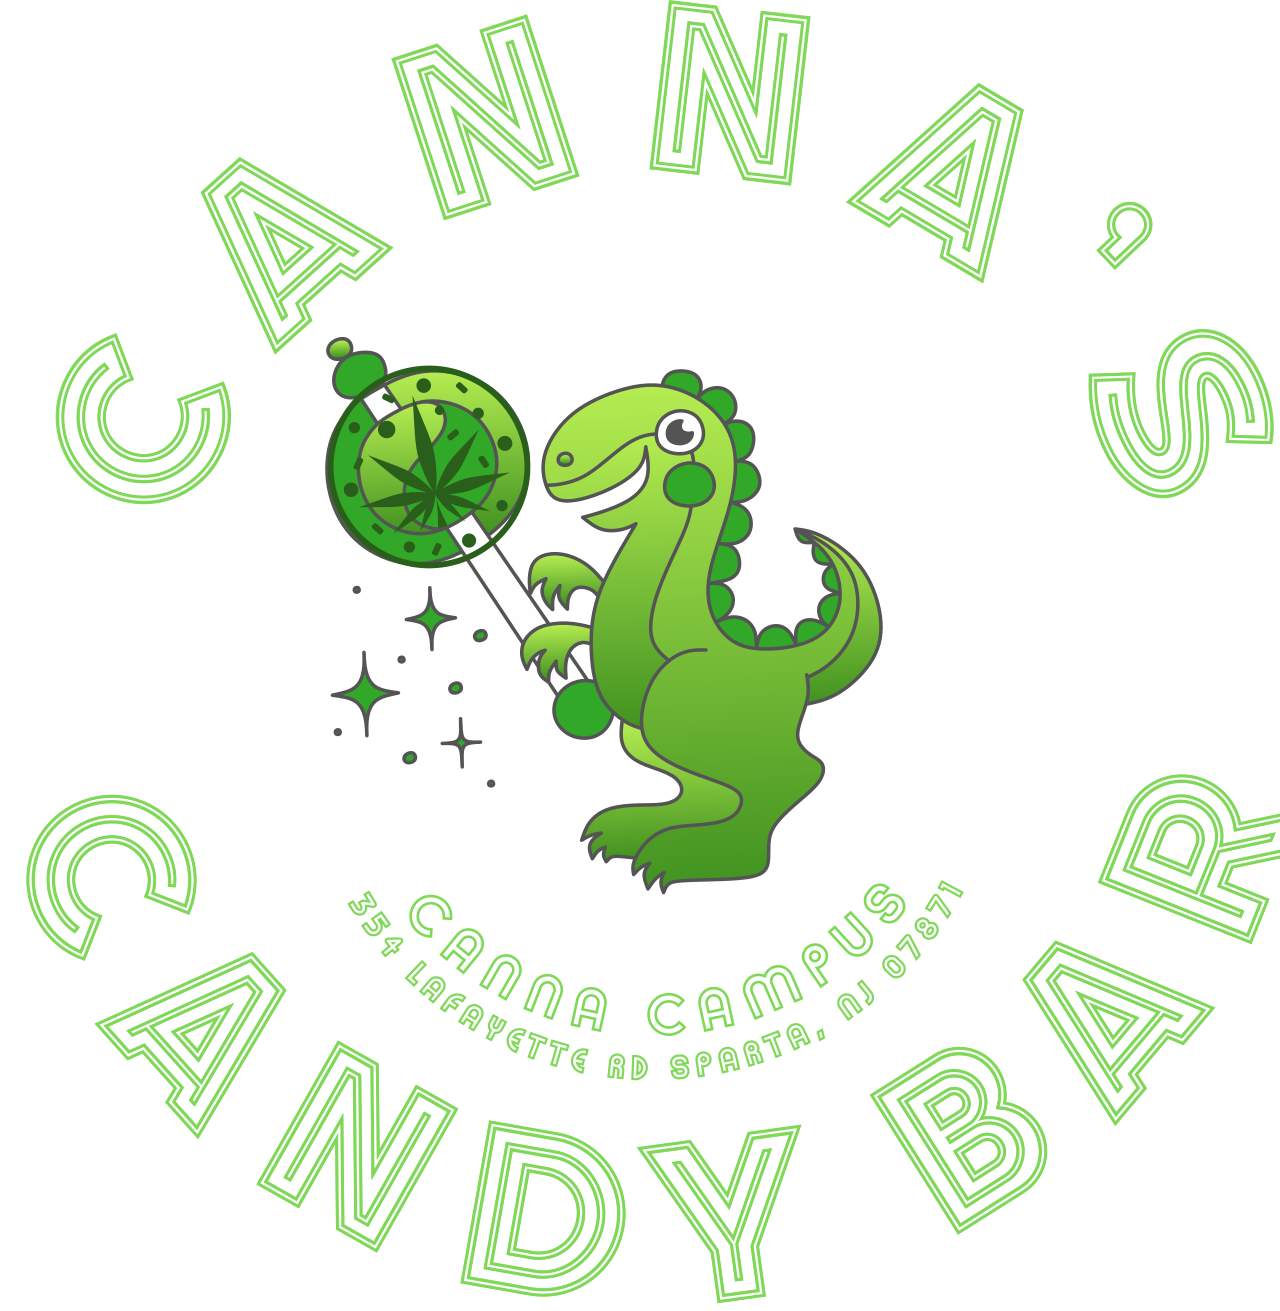 CANDY BAR's web page